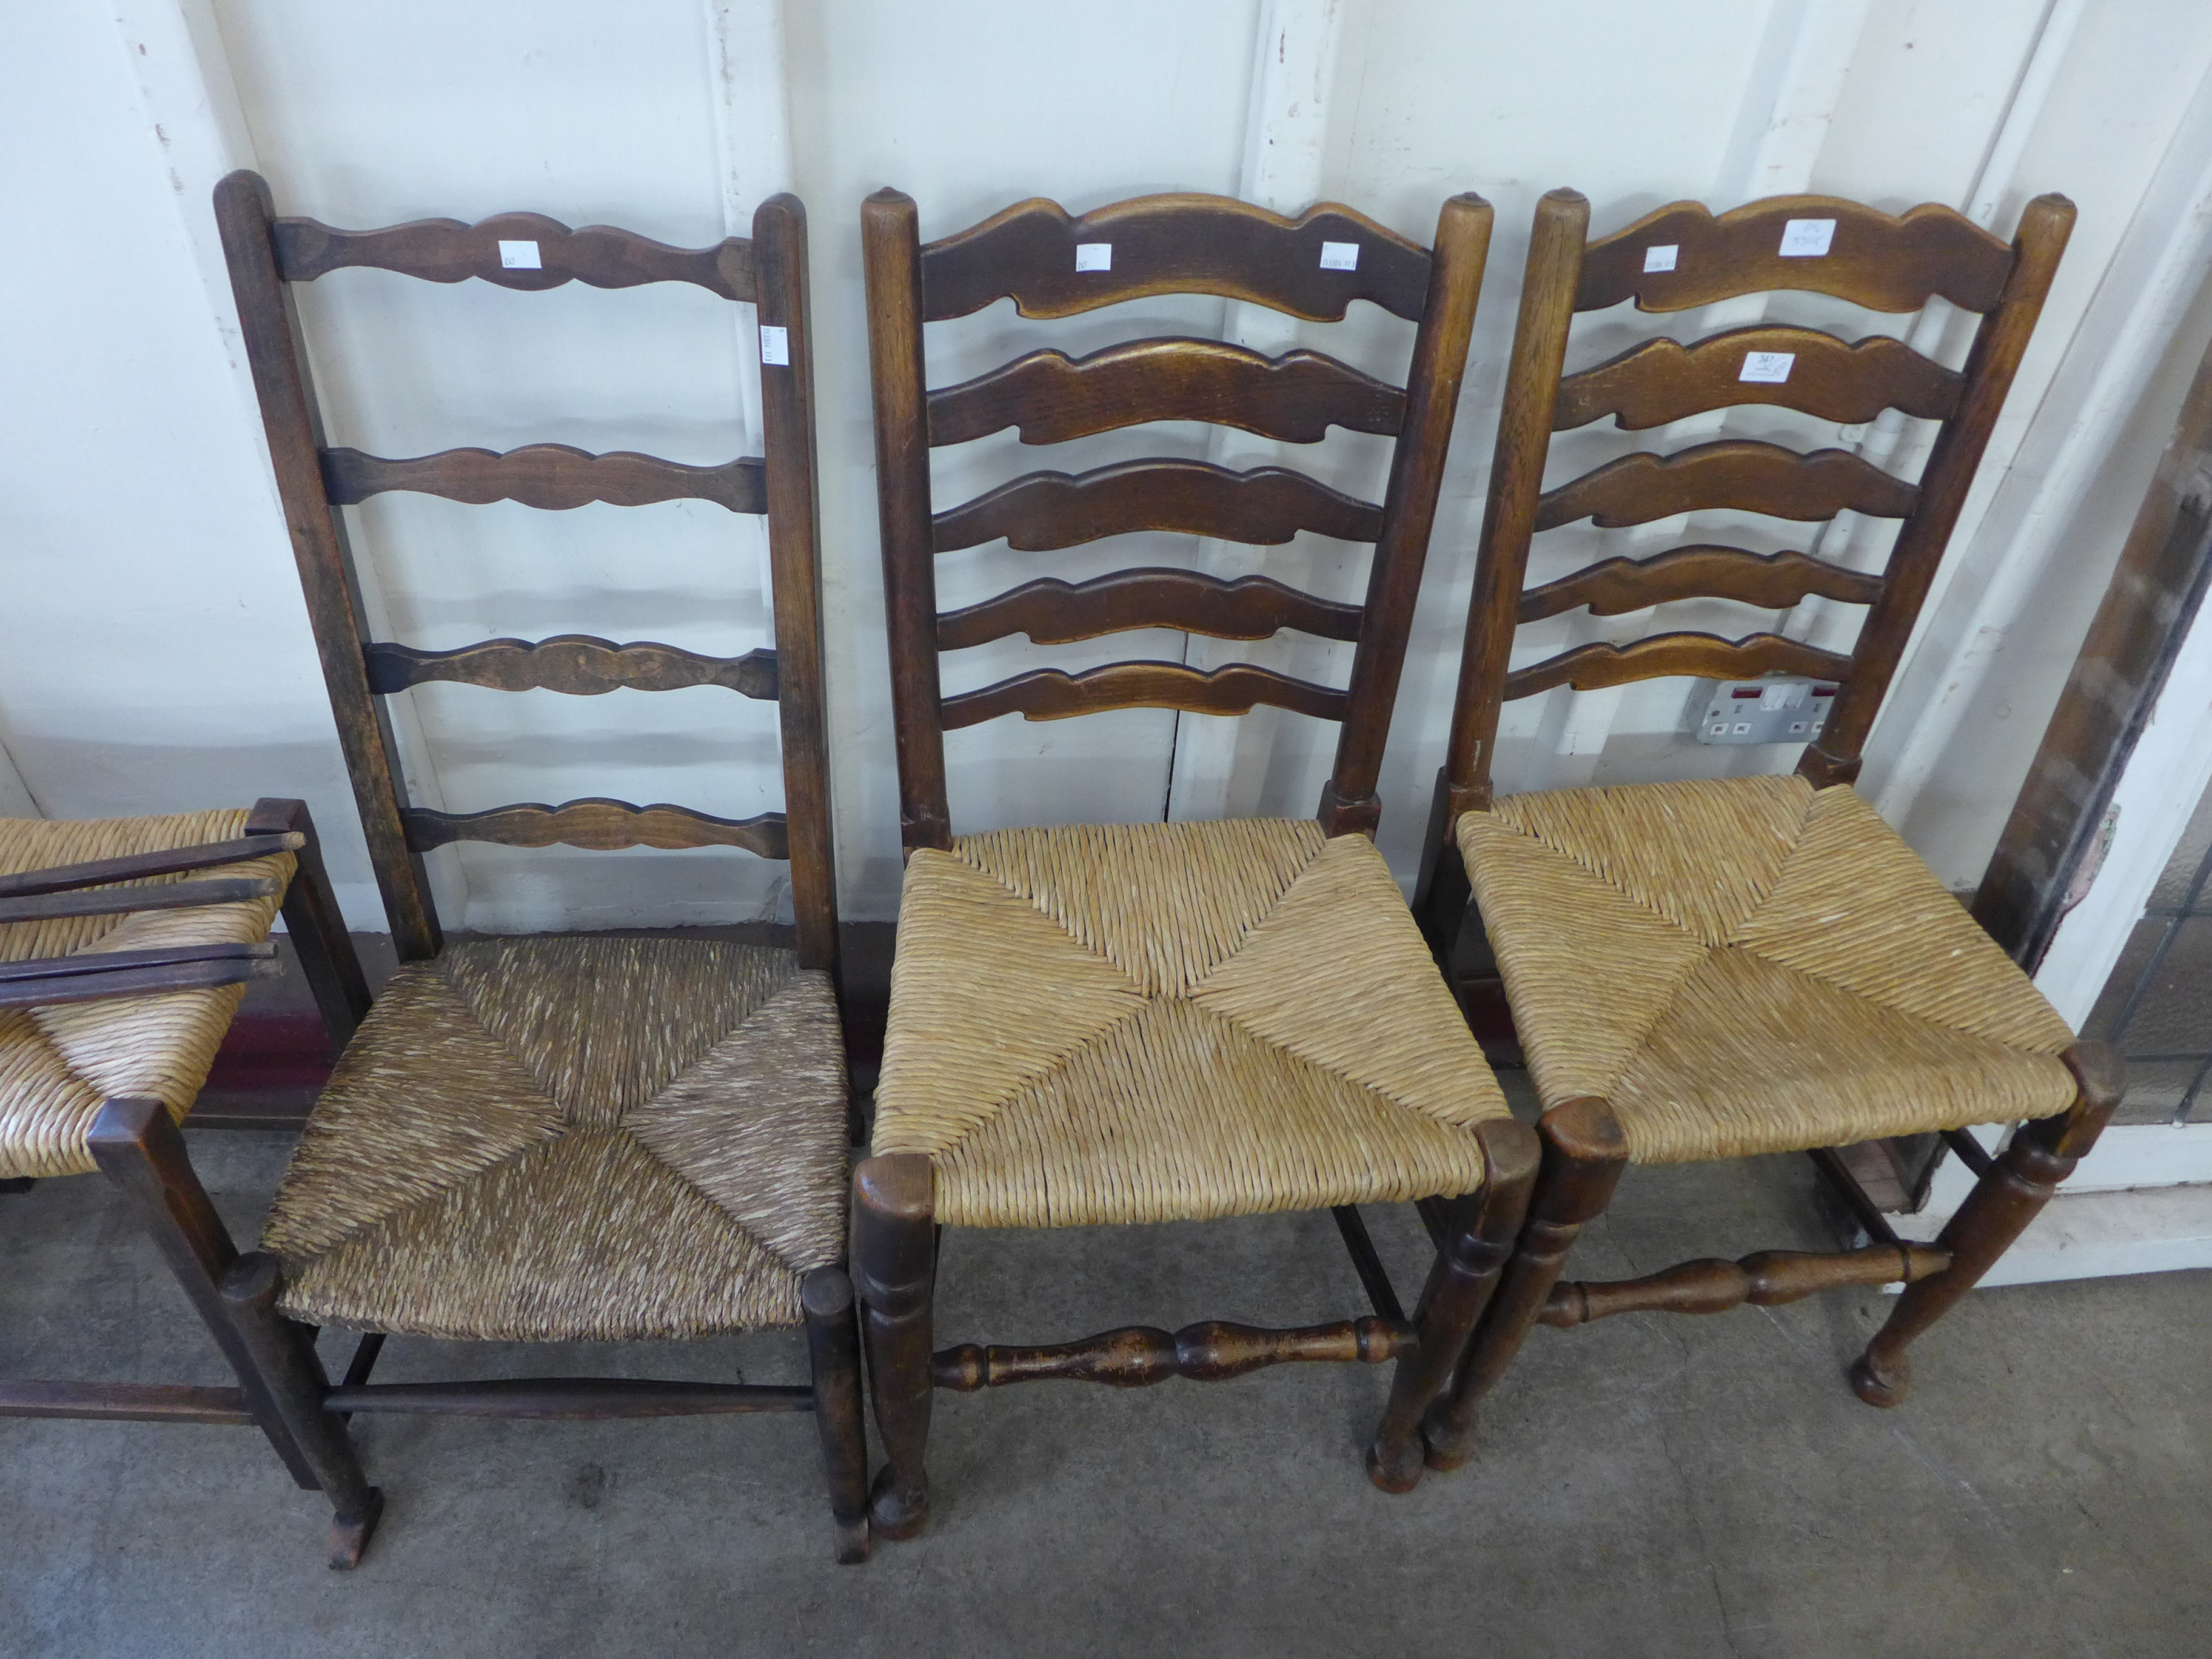 Two Arts and Crafts beech chairs (one a/f), a stool and a pair of elm rush seated ladderback chairs